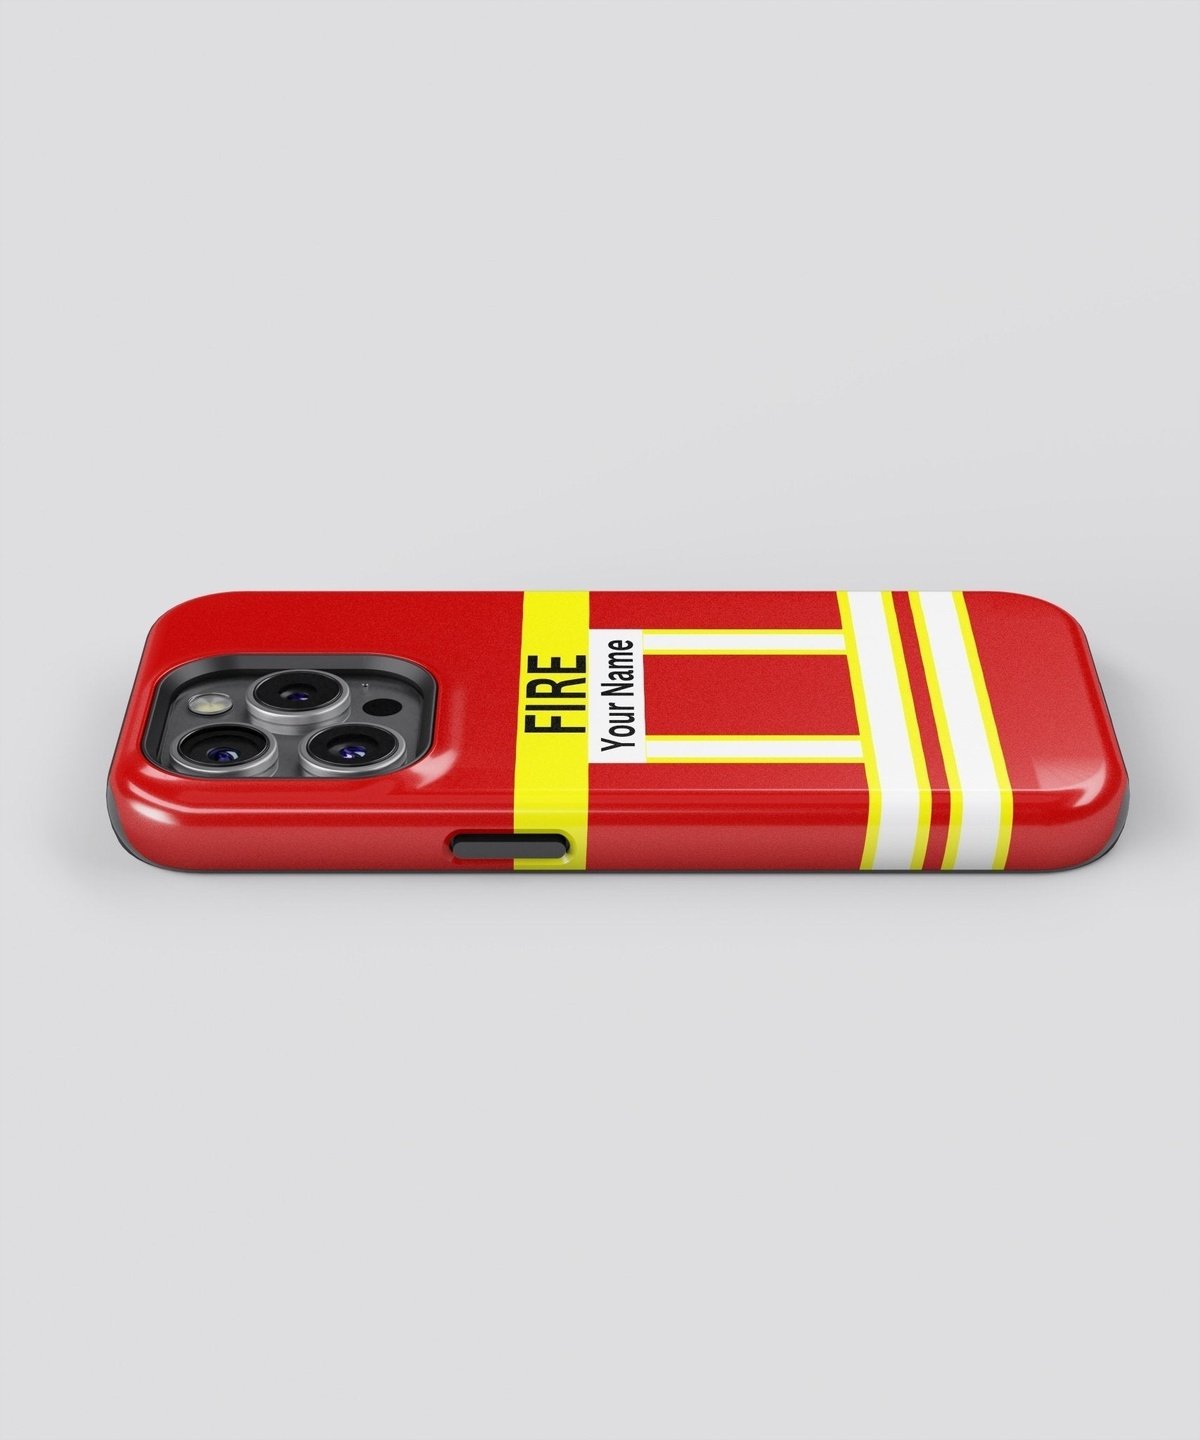 Firefighter Red Personalizable - iPhone Case